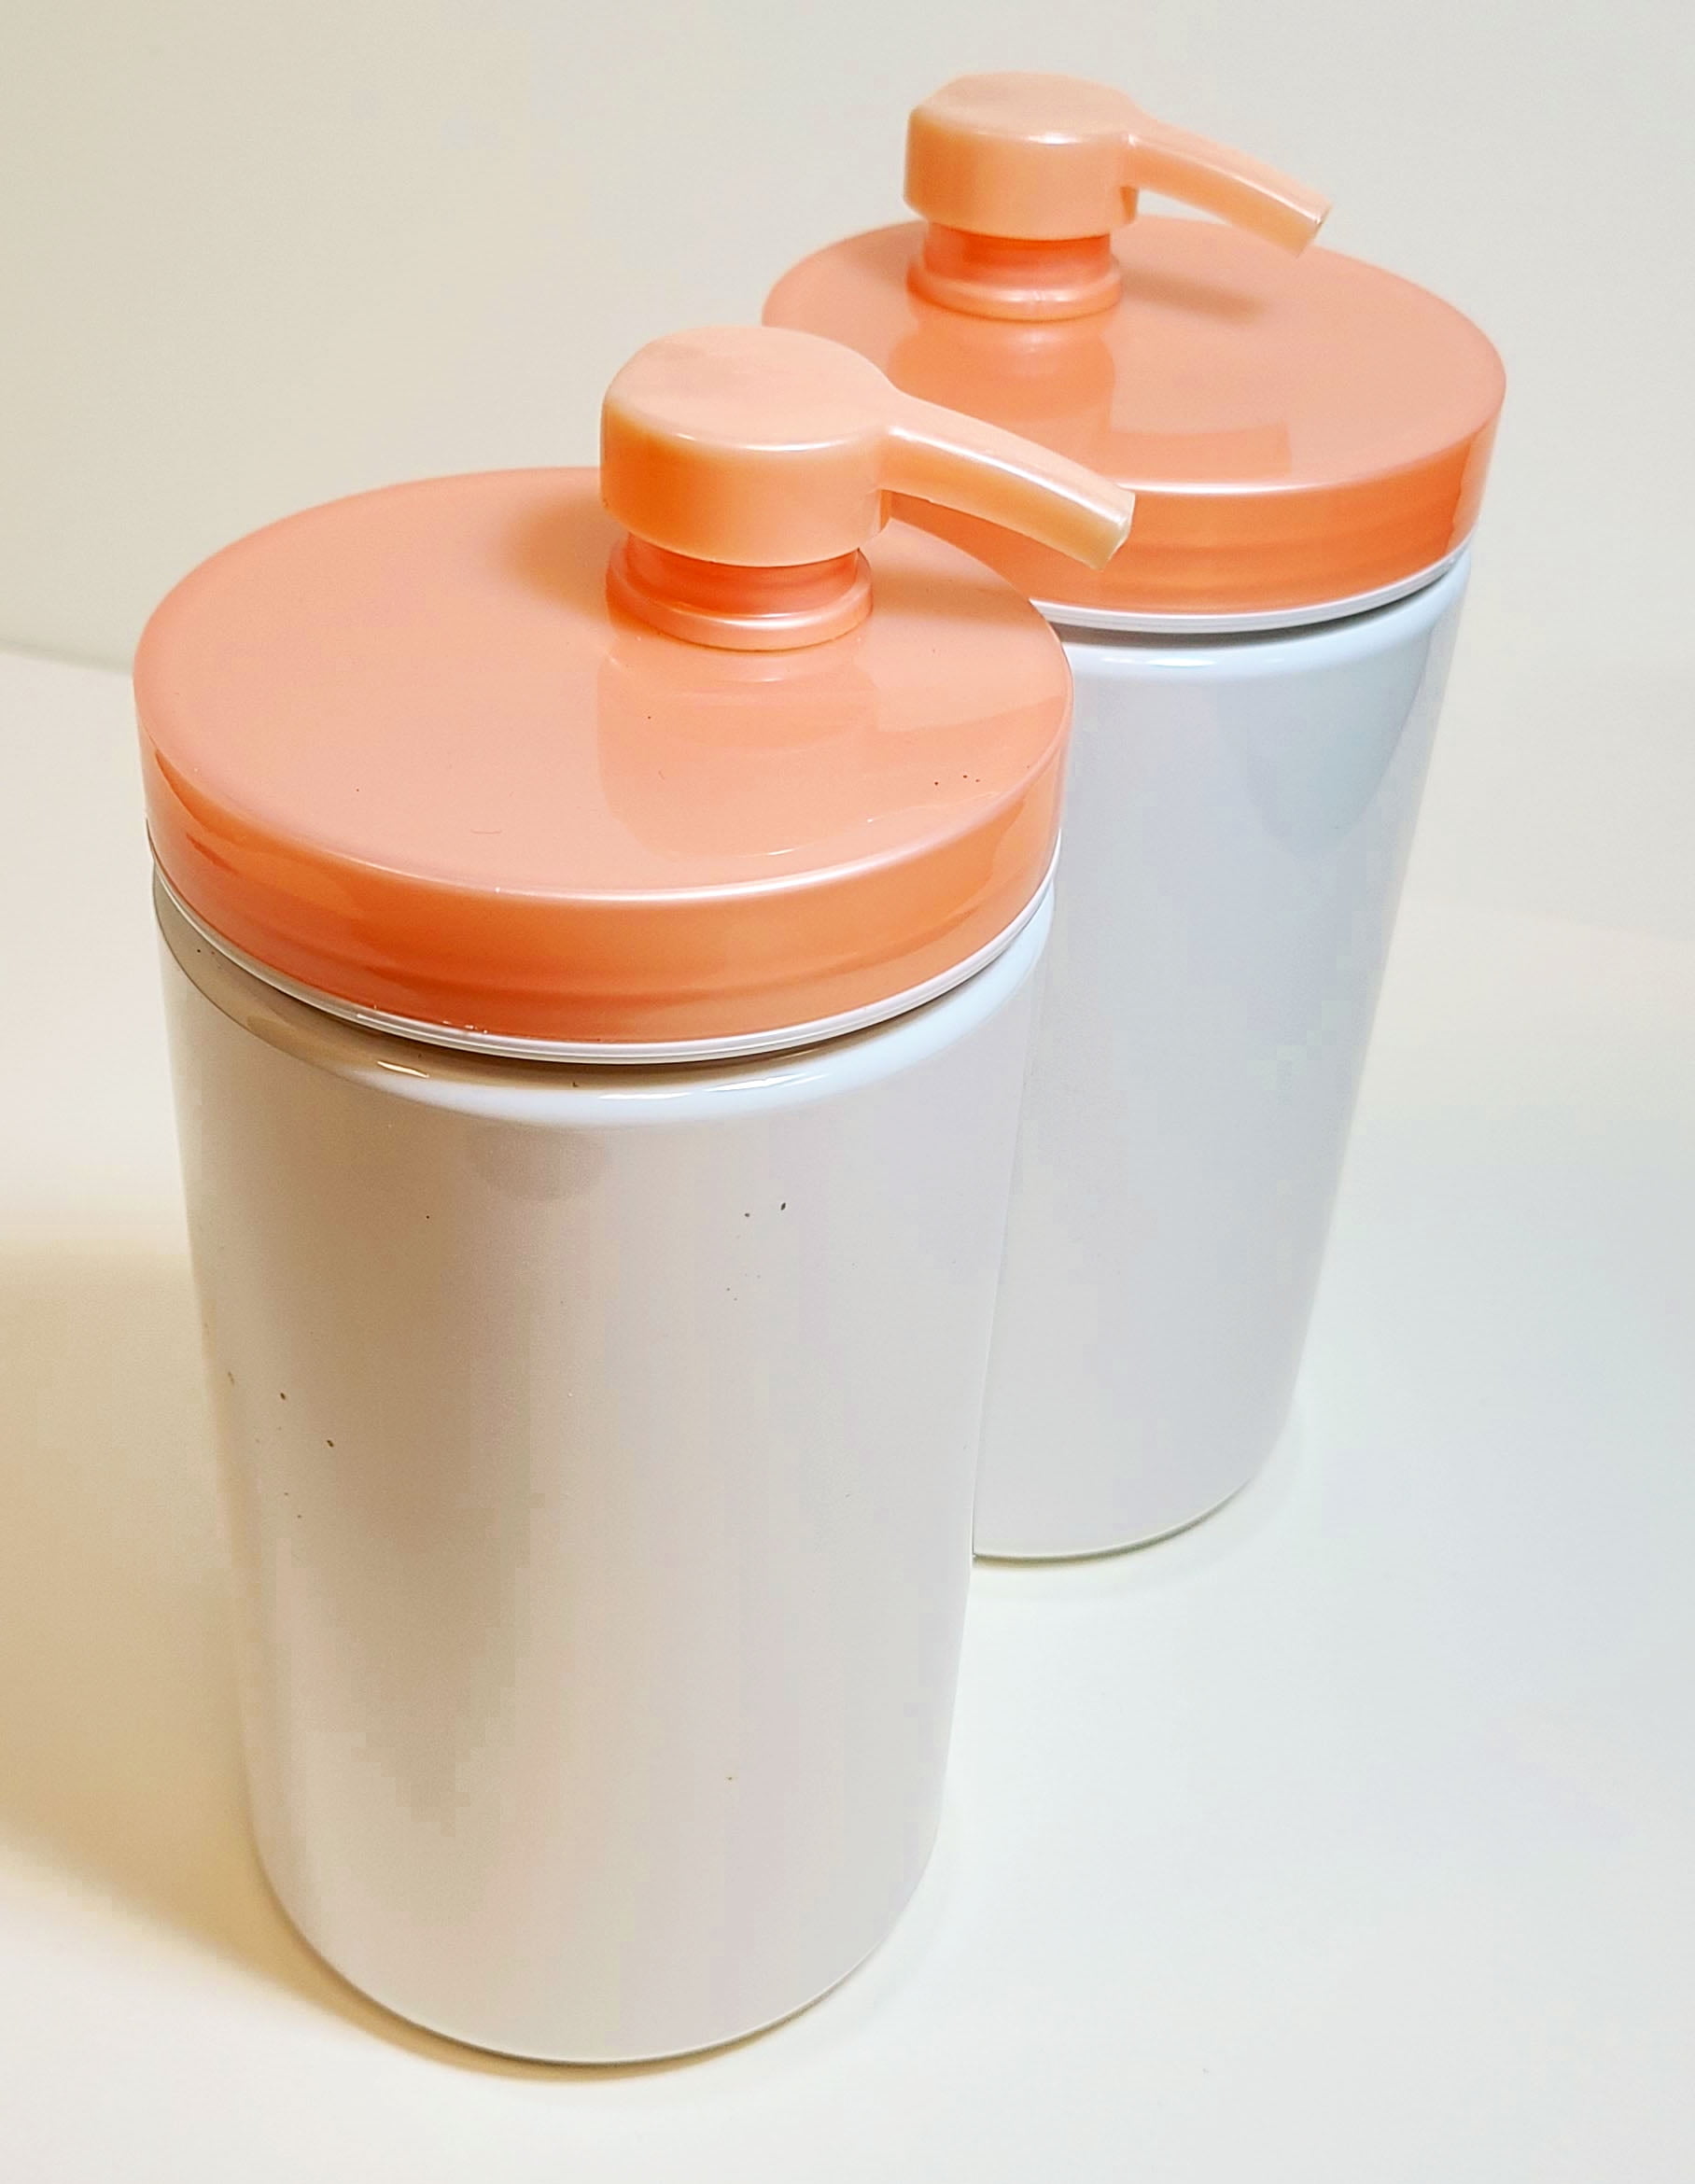 Mayo fTupperware Salad Dressing Sides Containers Set of 2 in Light Purple New 